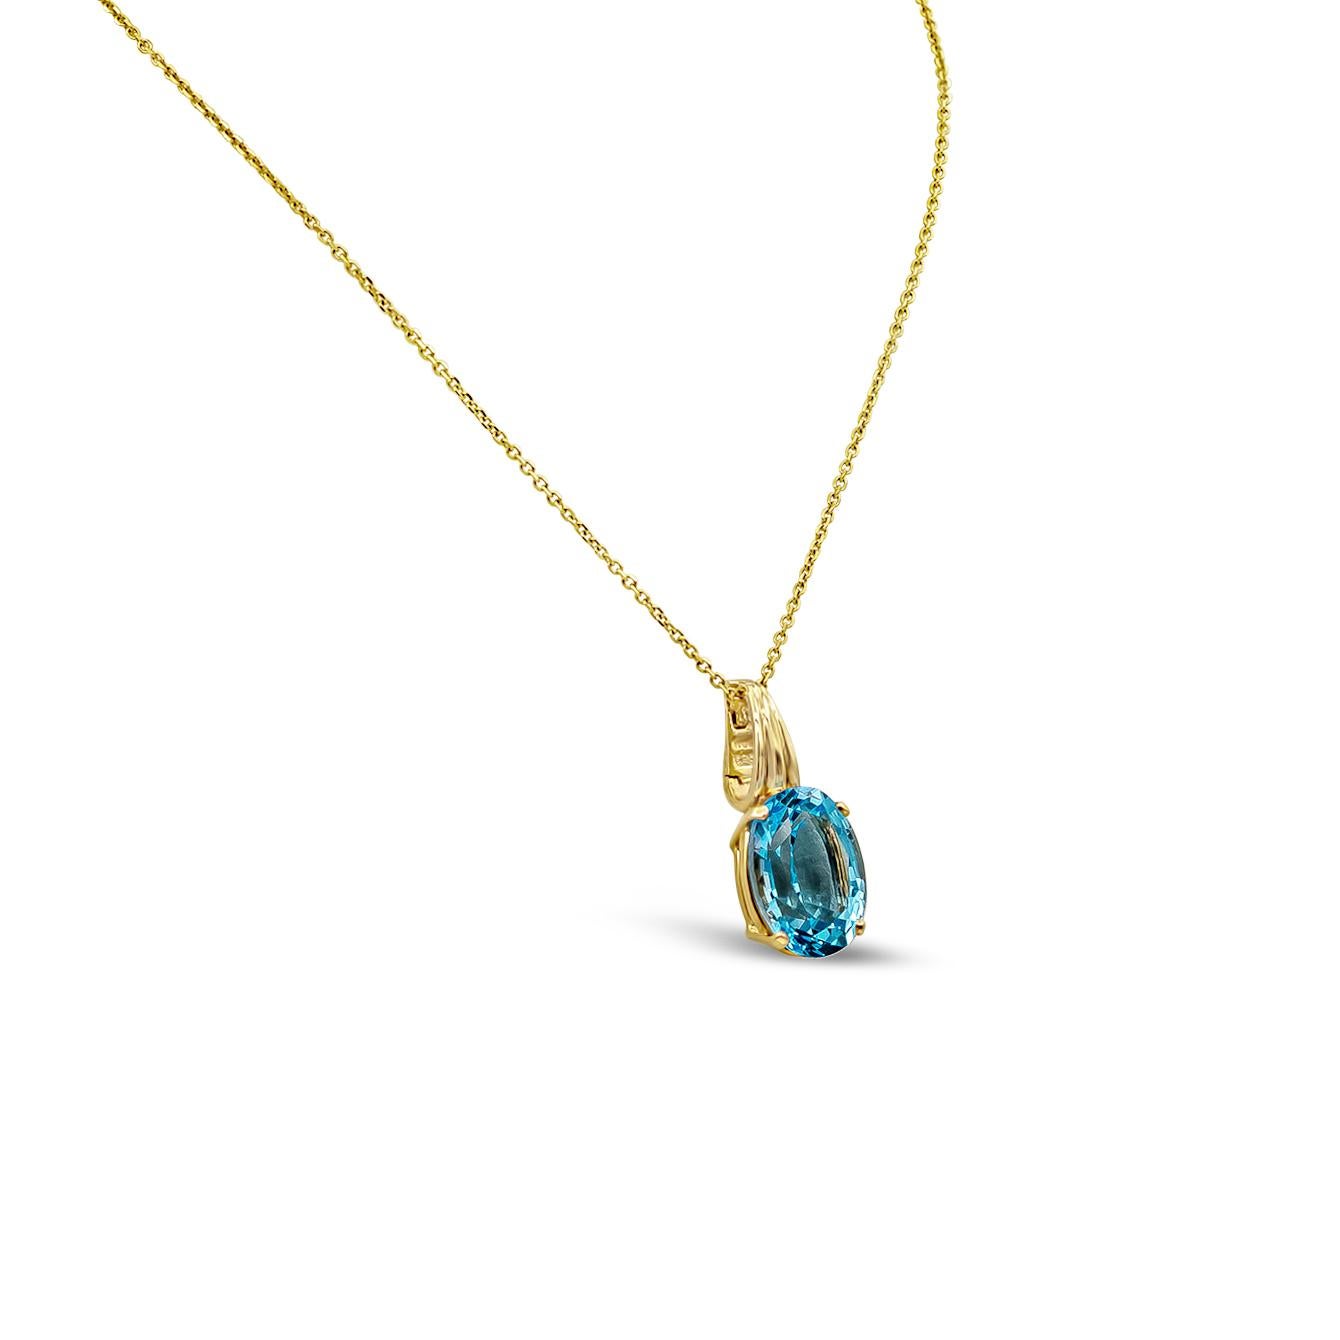 A simple yet timeless pendant necklace showcasing a color rich blue oval cut topaz, set in an 18k yellow gold mounting. Topaz weighs 12.10 carats. Suspended on an 18 inch yellow gold chain. 